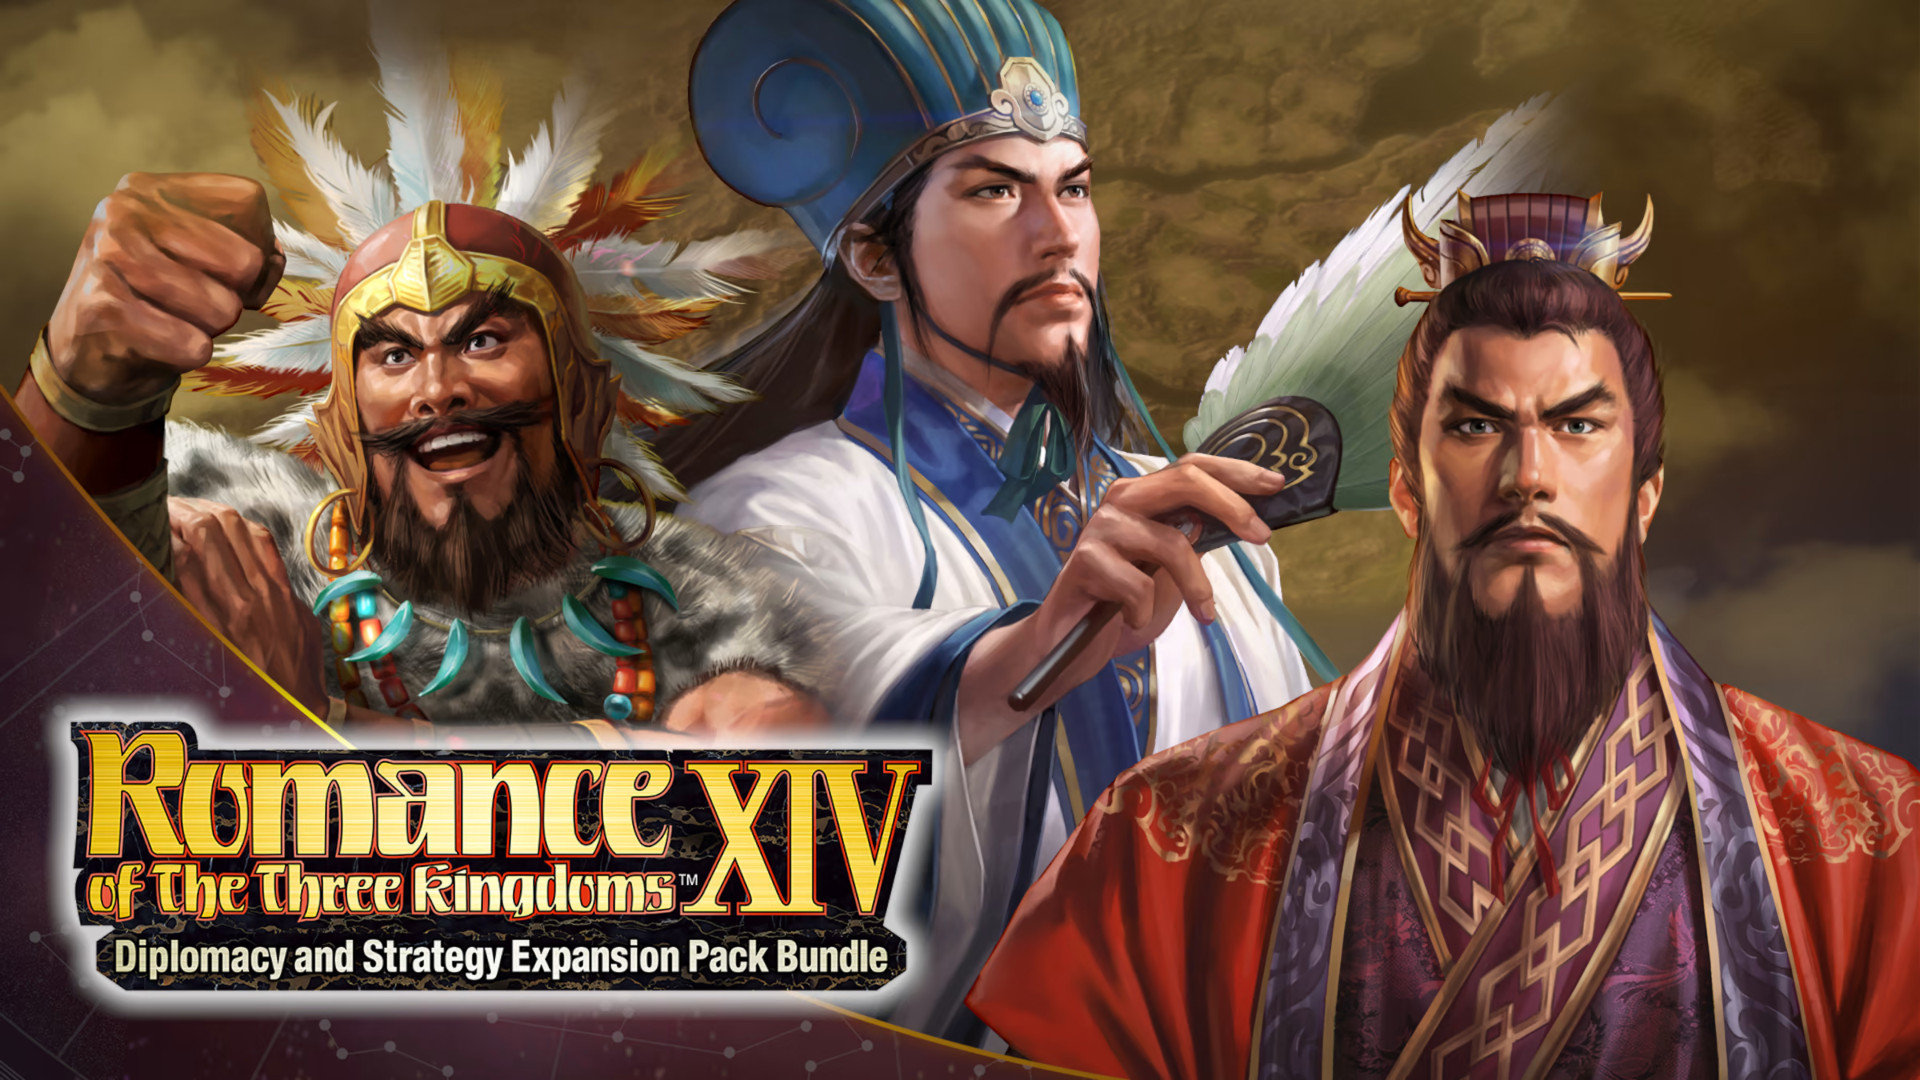 Romance of the Three Kingdoms XIV - Diplomacy and Strategy Expansion Pack DLC Steam CD key, $39.55